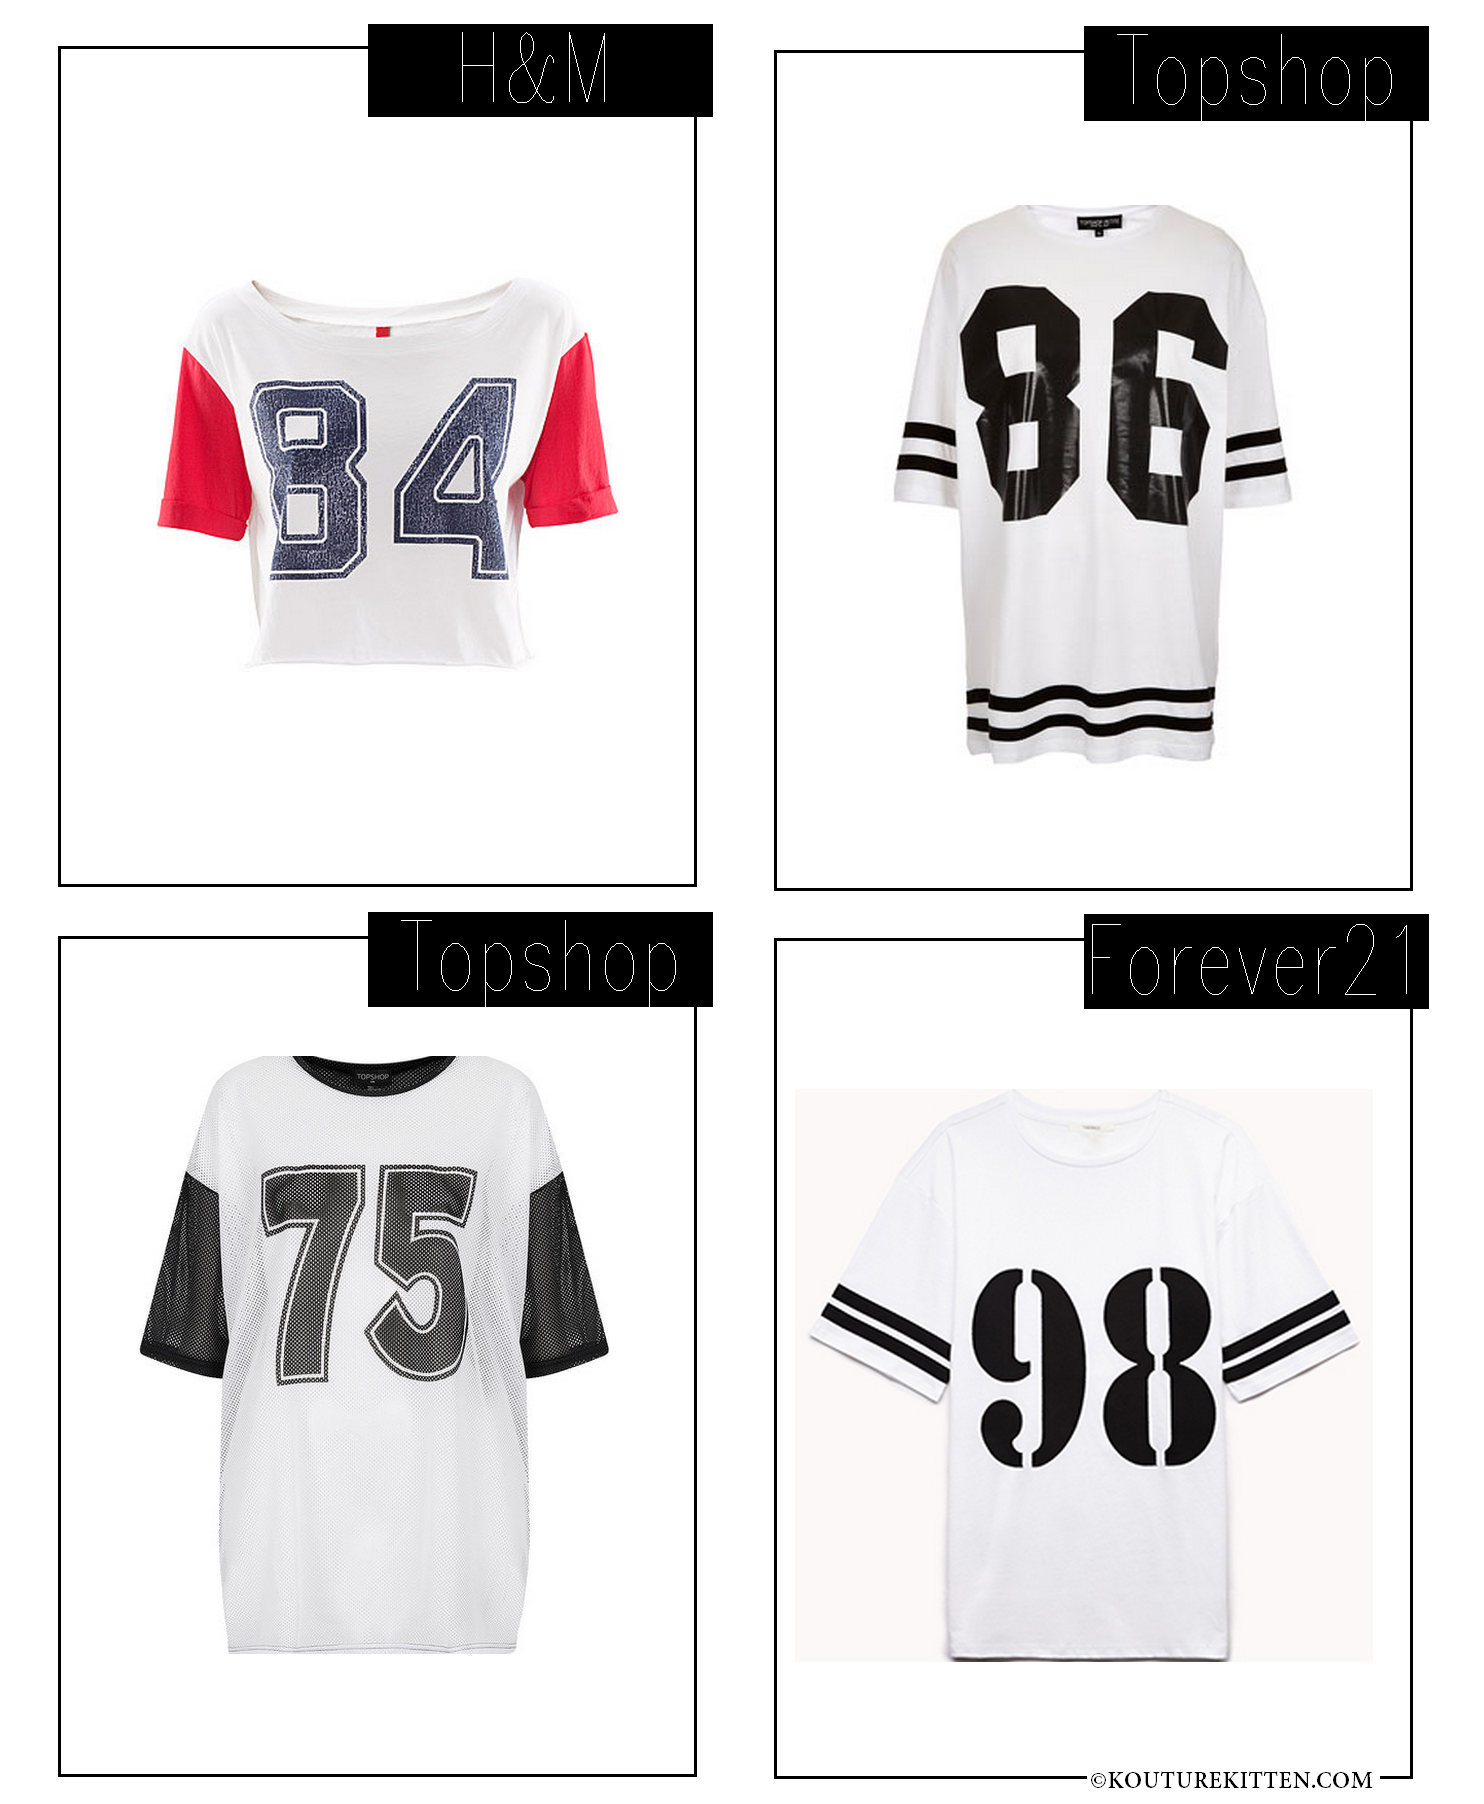 Forever 21 Athletic tee